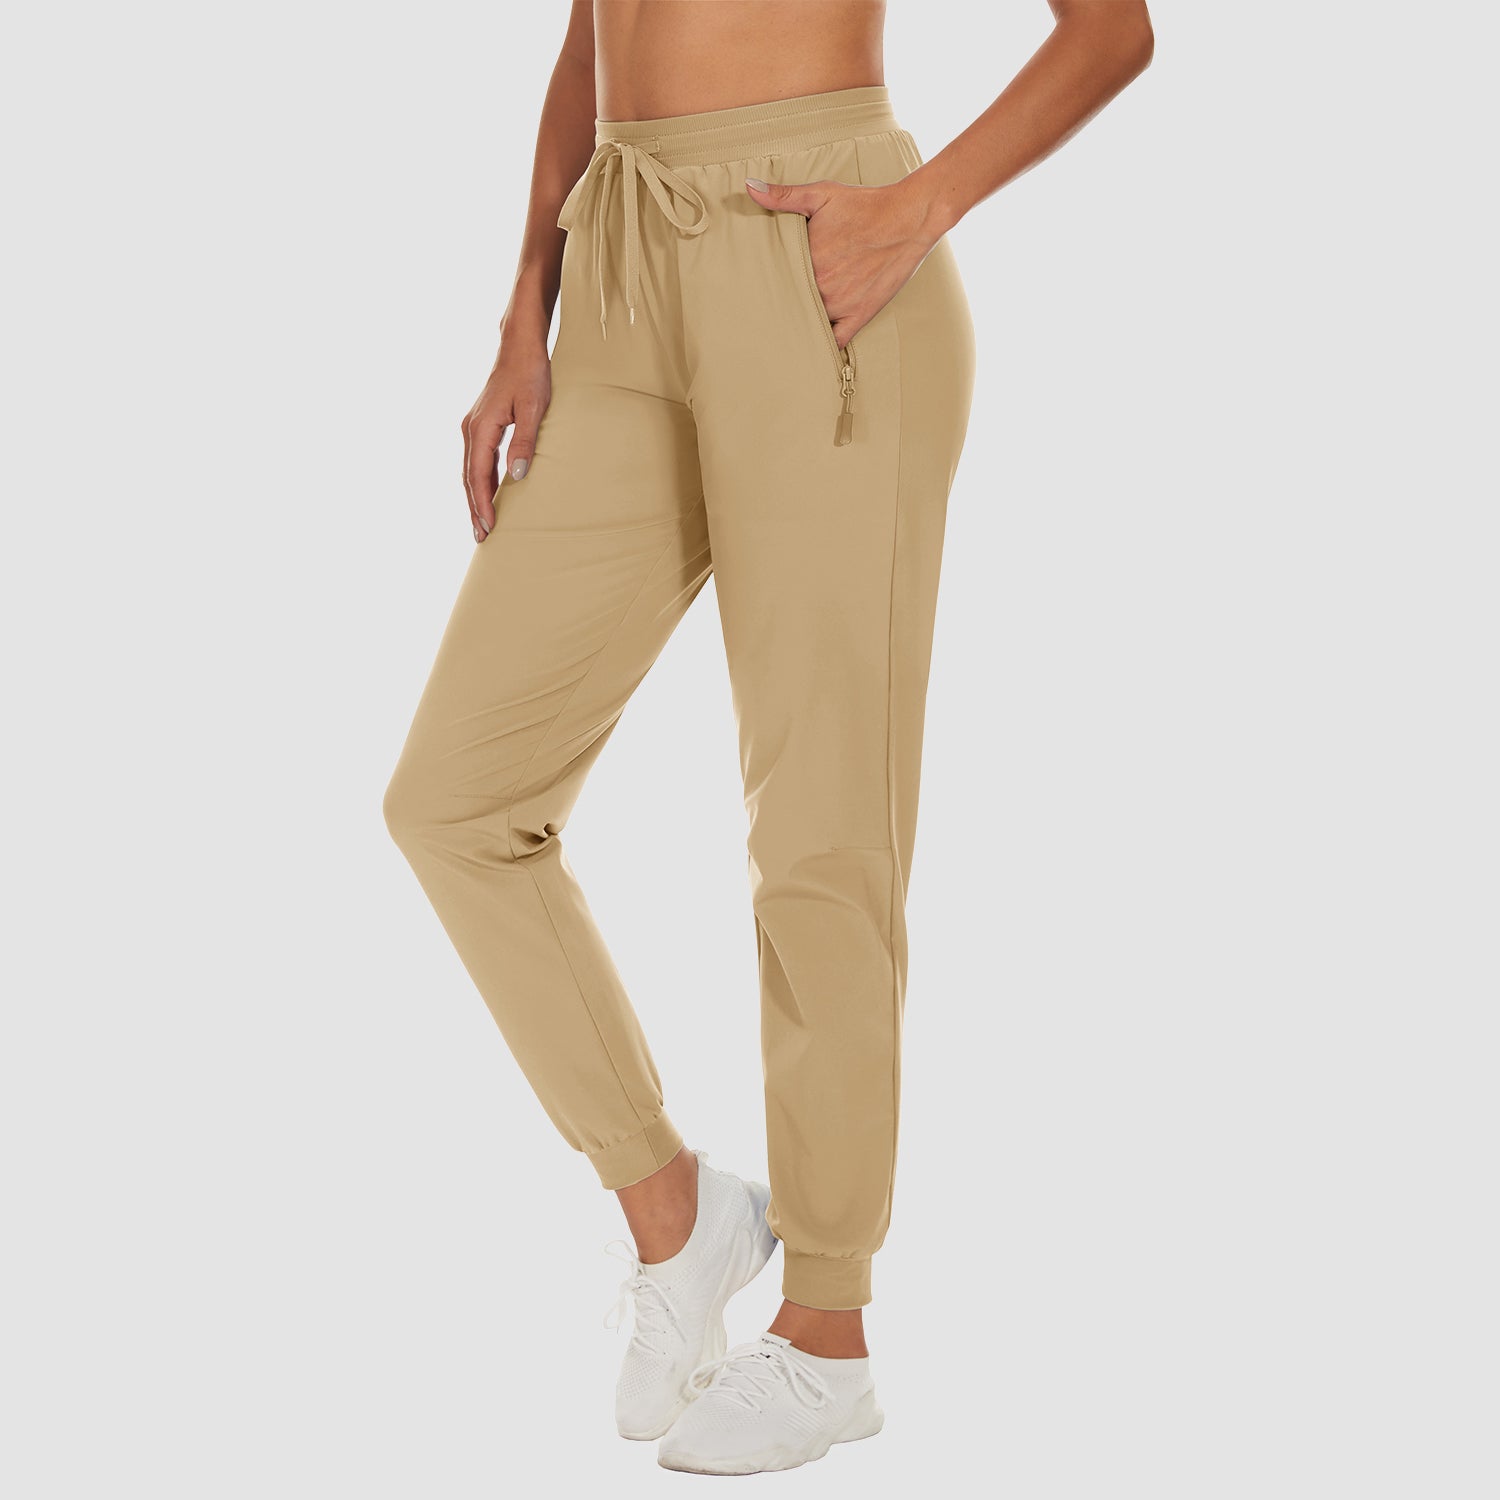 Girls' Athletic & Casual Pants